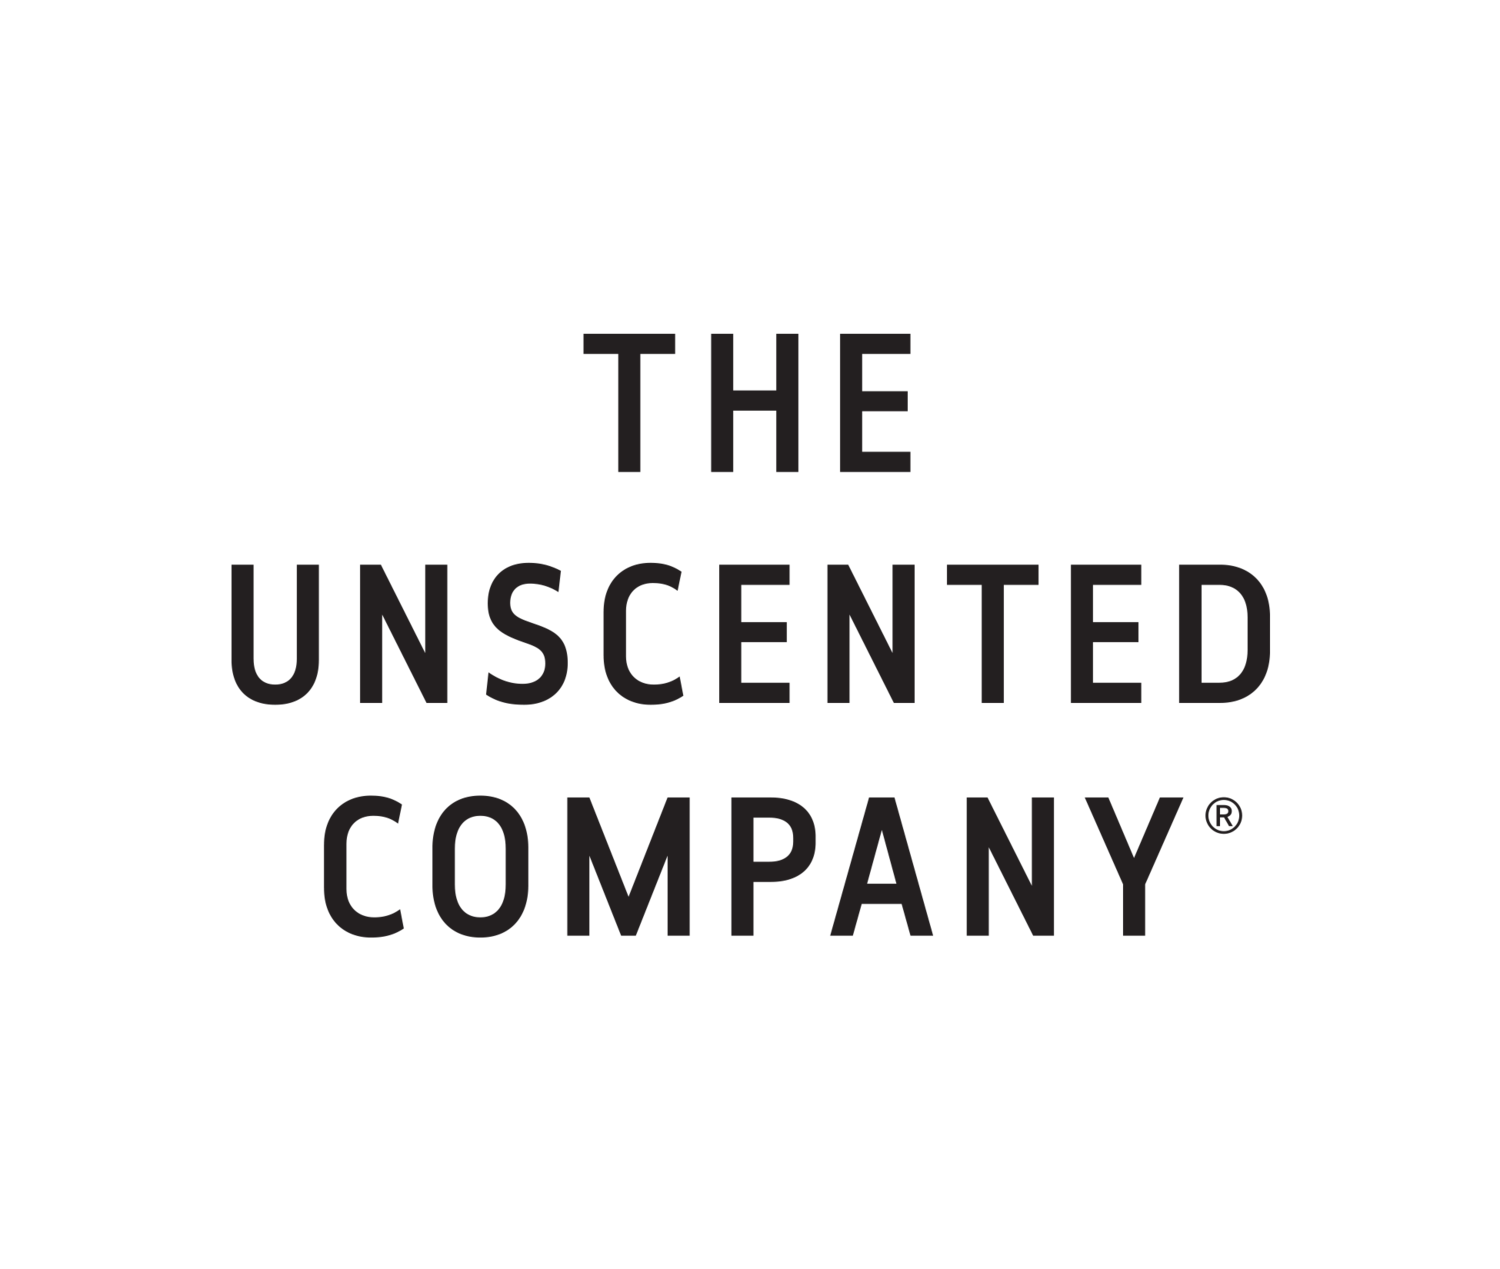 THE UNSCENTED COMPANY